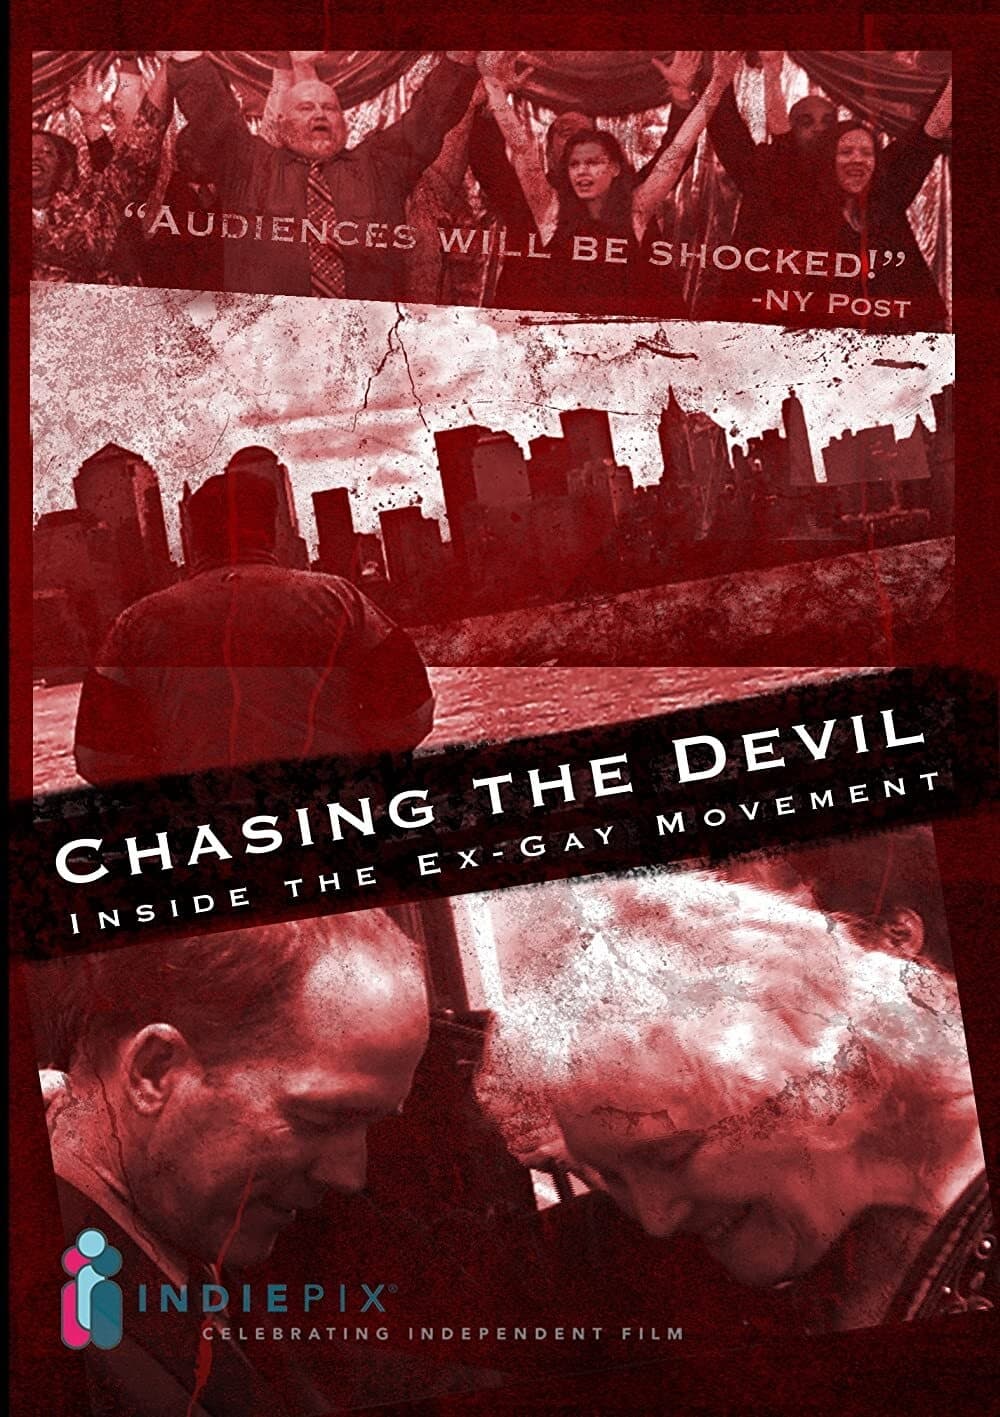 Chasing The Devil:  Inside the Ex-Gay Movement